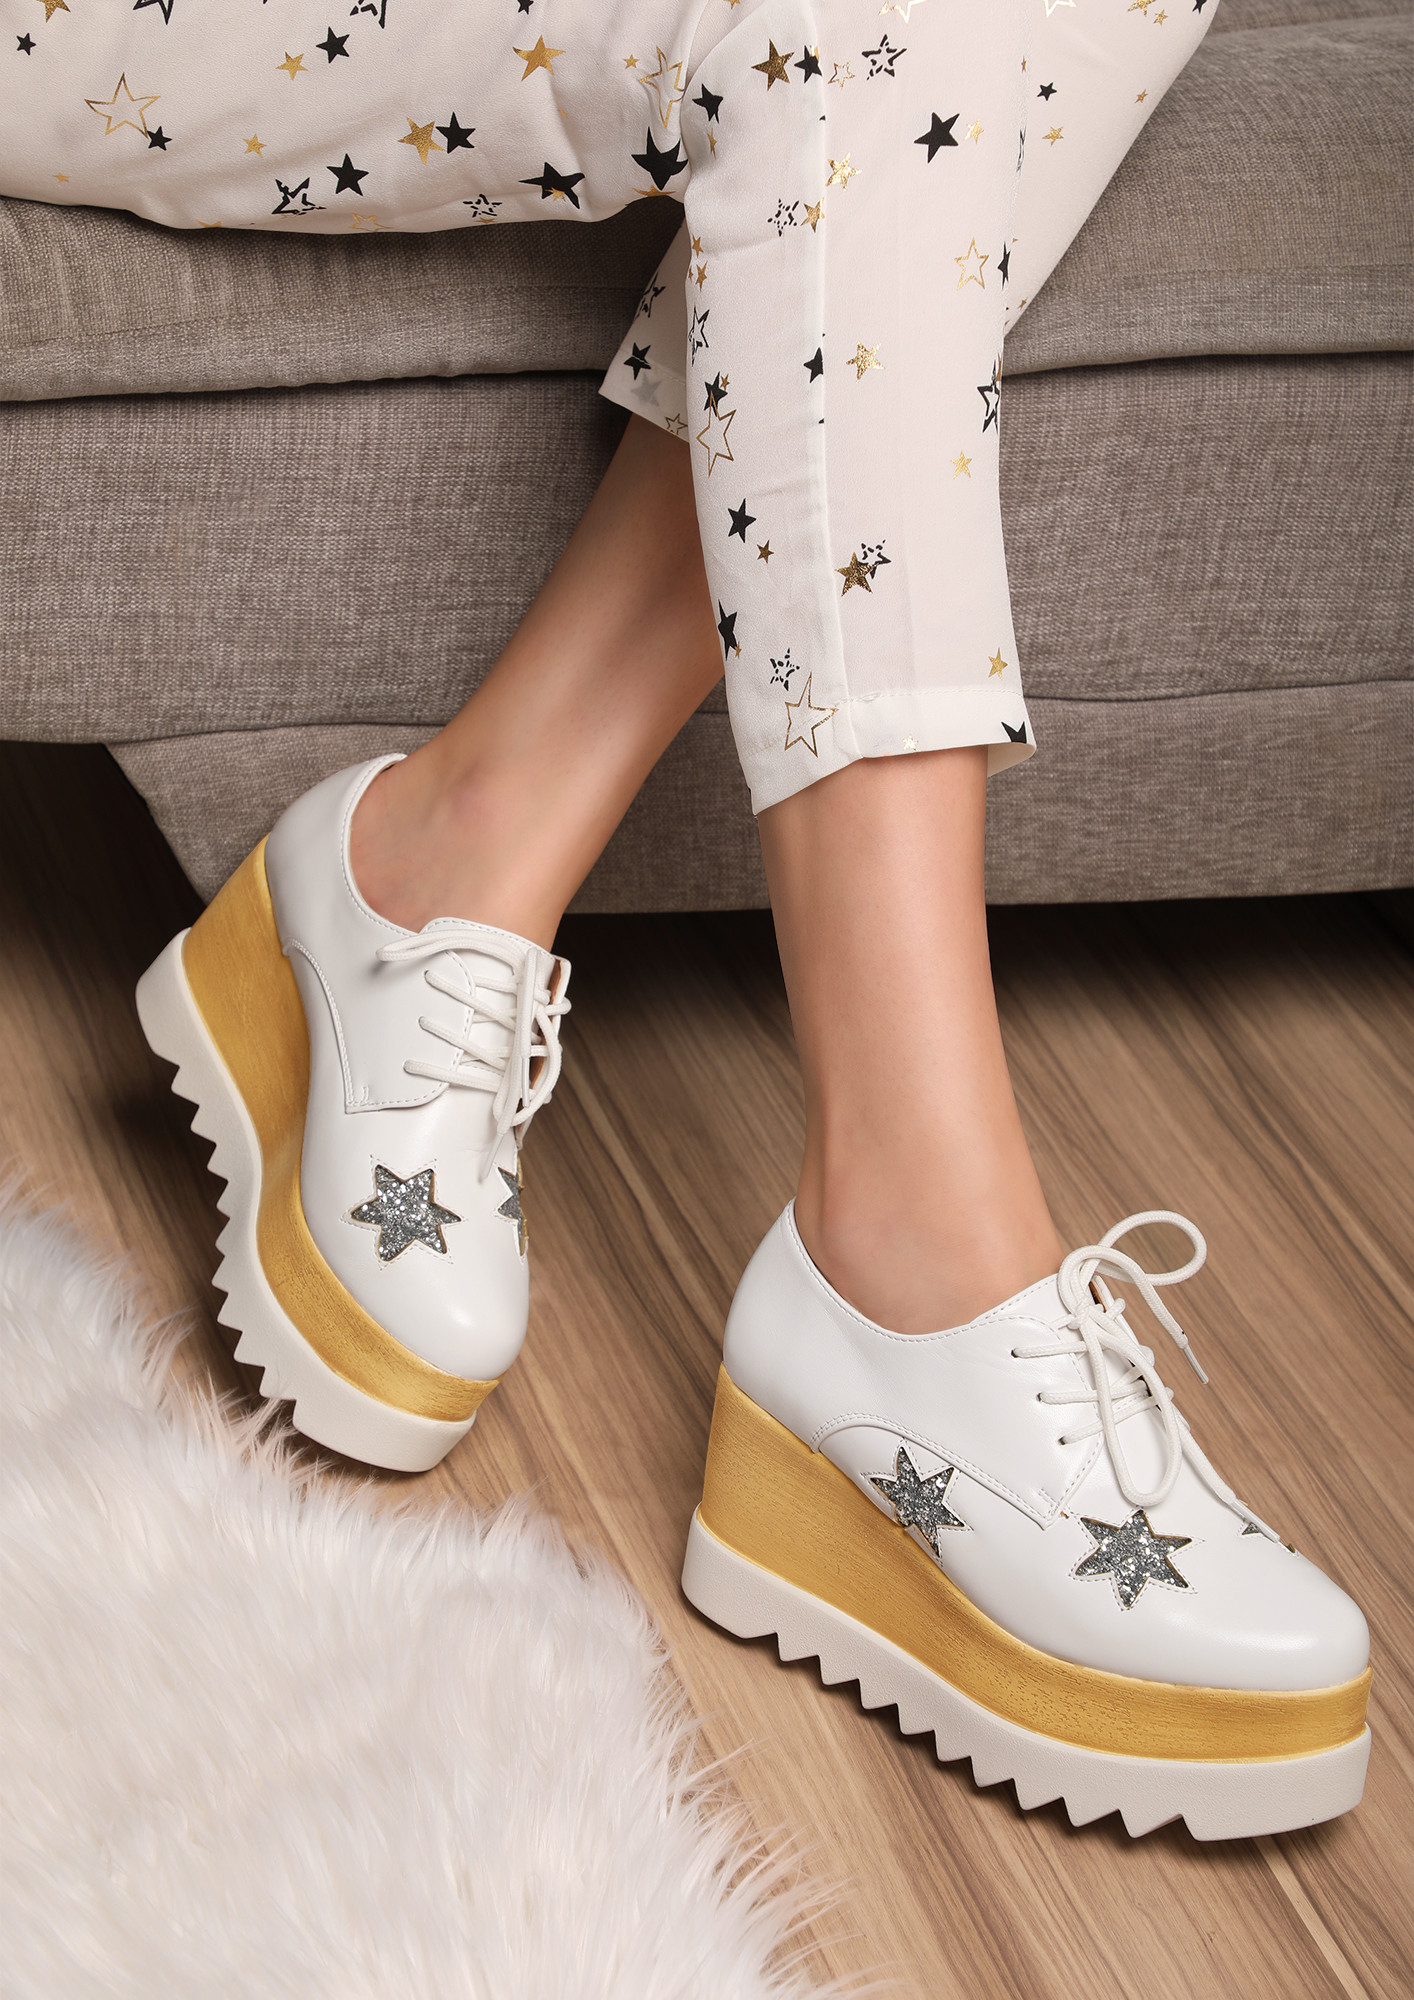 STARS TO REMEMBER WHITE HEELED SHOES